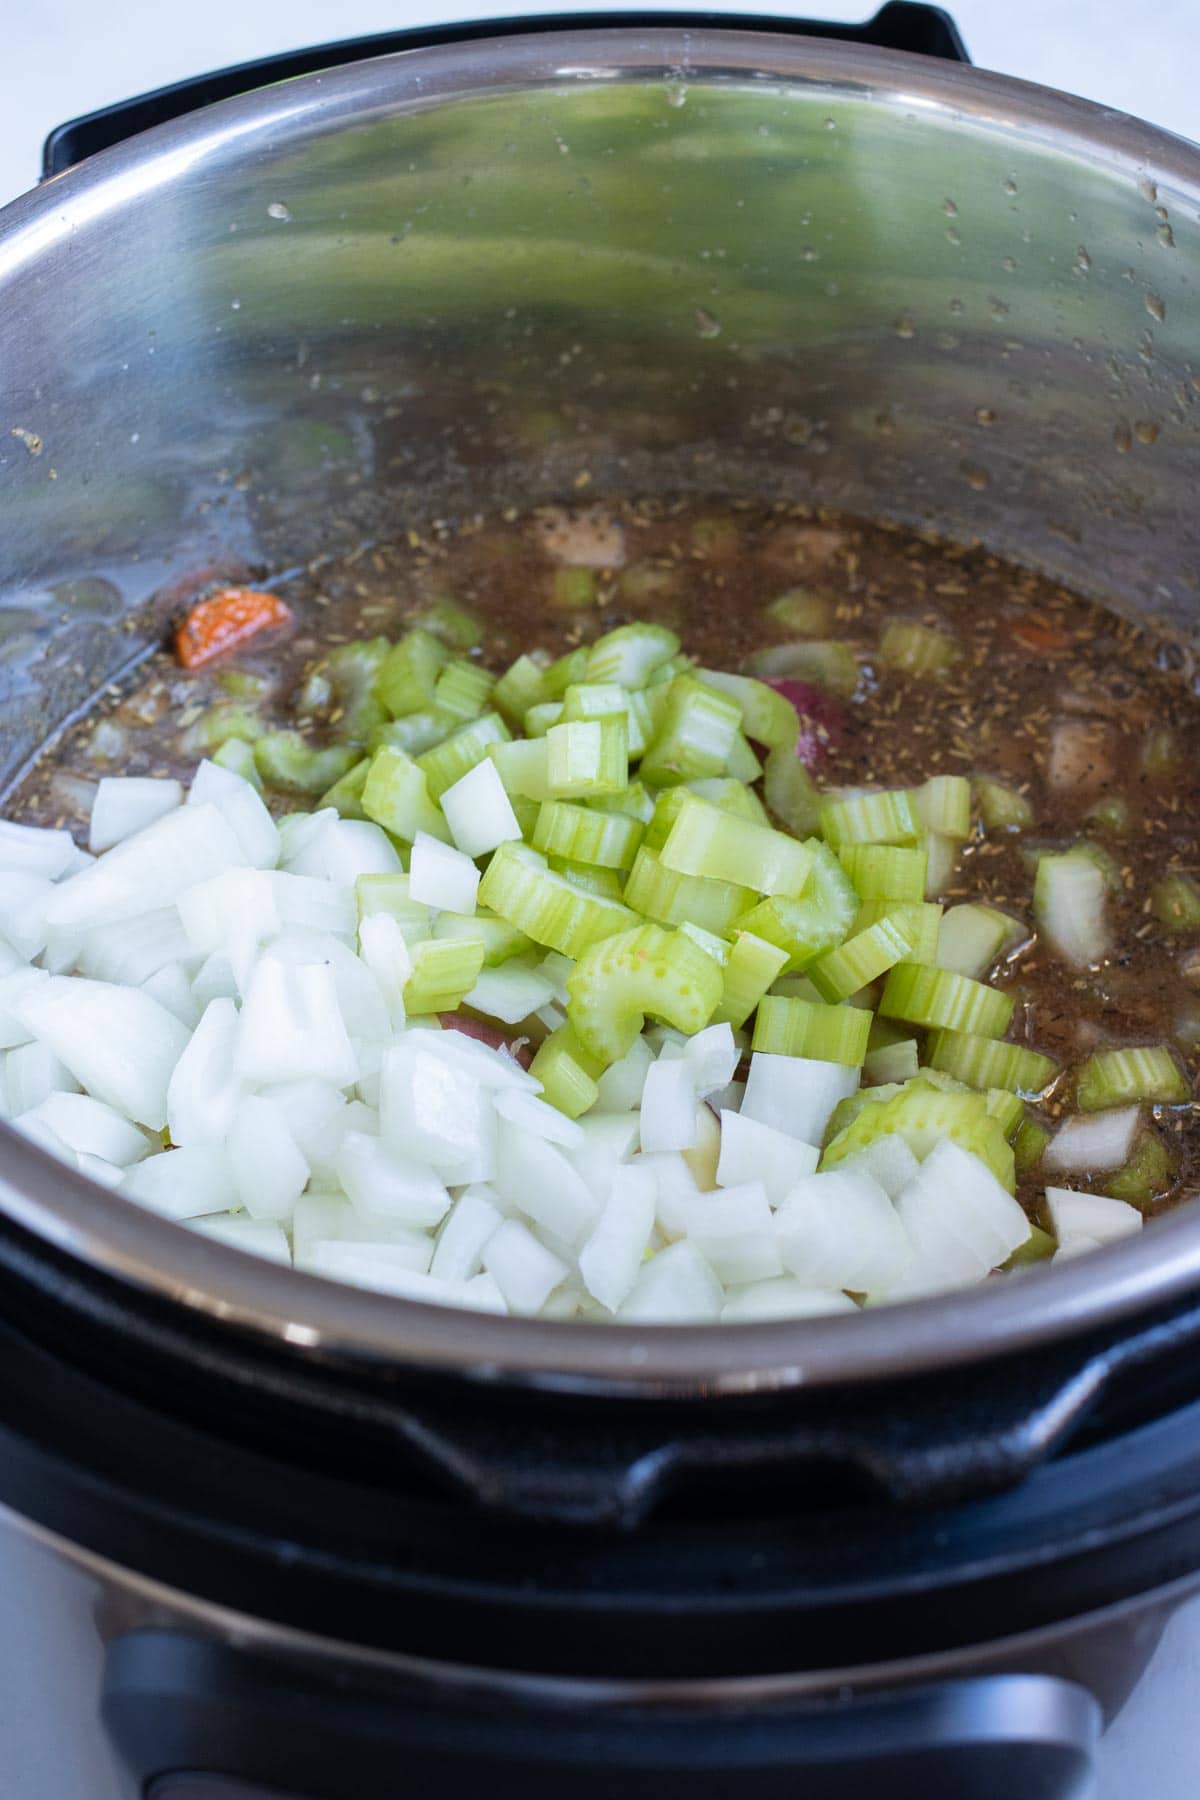 Diced vegetables are added to the pressure cooker.